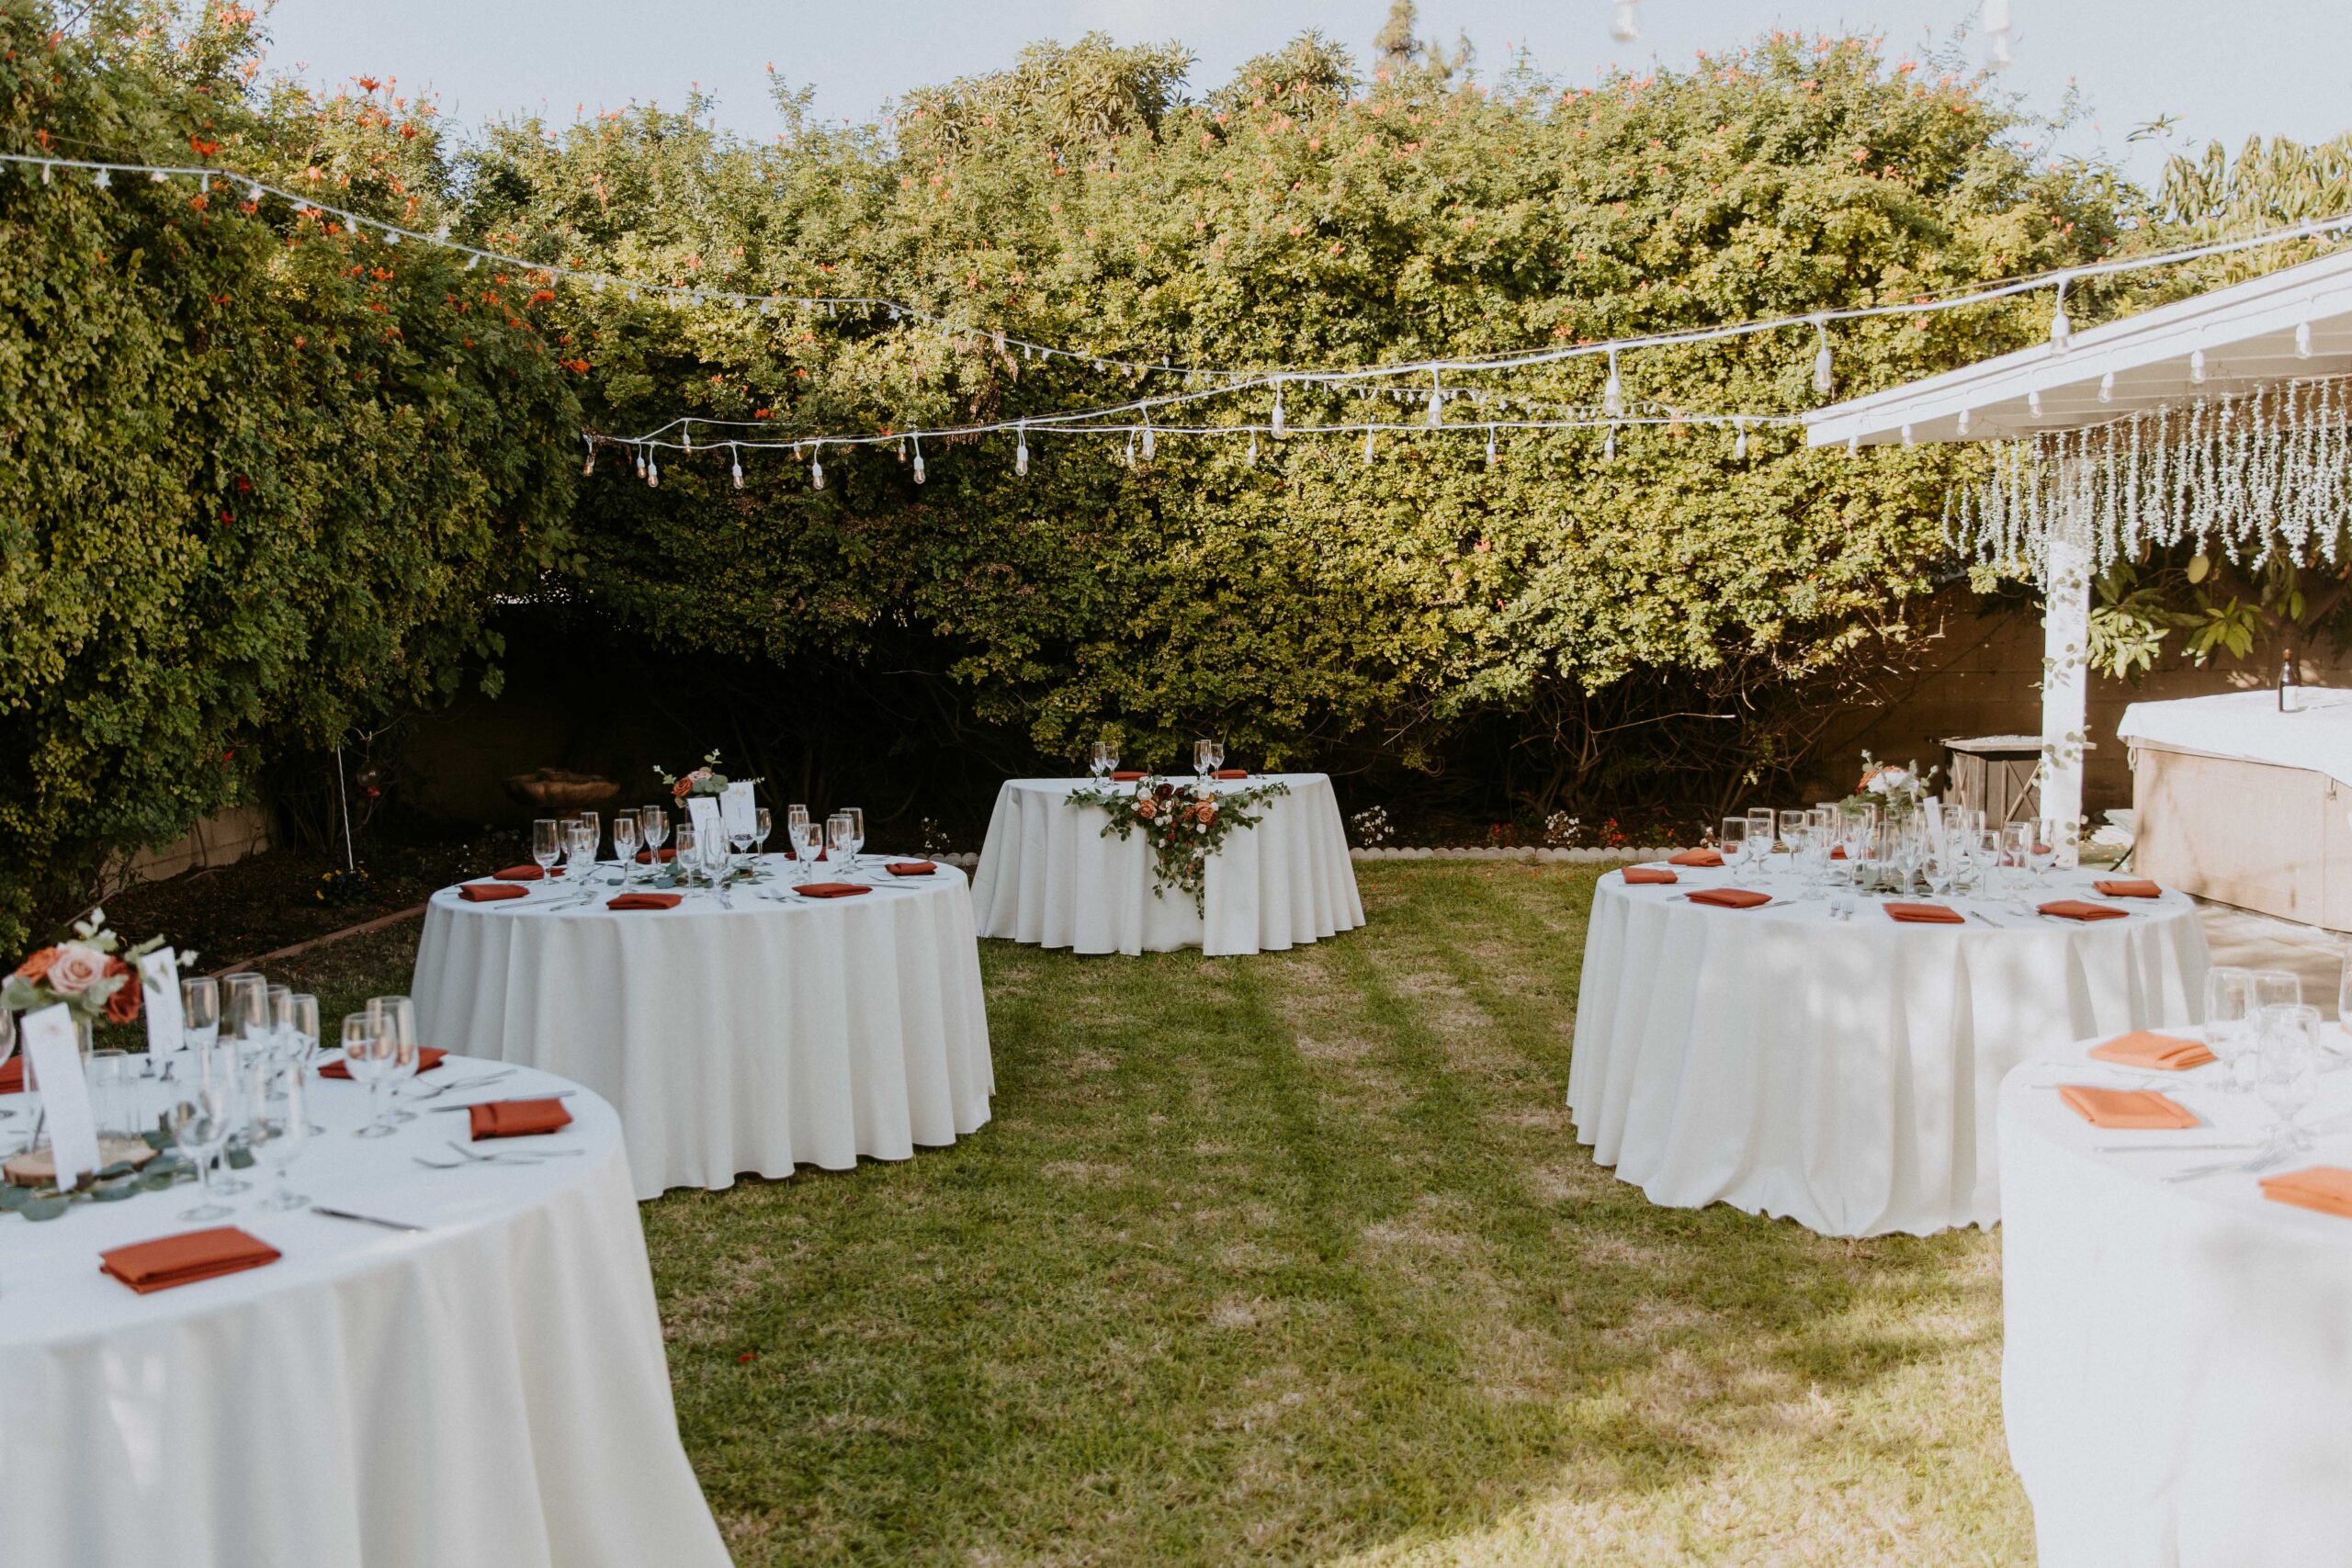 Elegantly set dining table for two with floral centerpiece and candlelight outdoors at an intimate backyard wedding